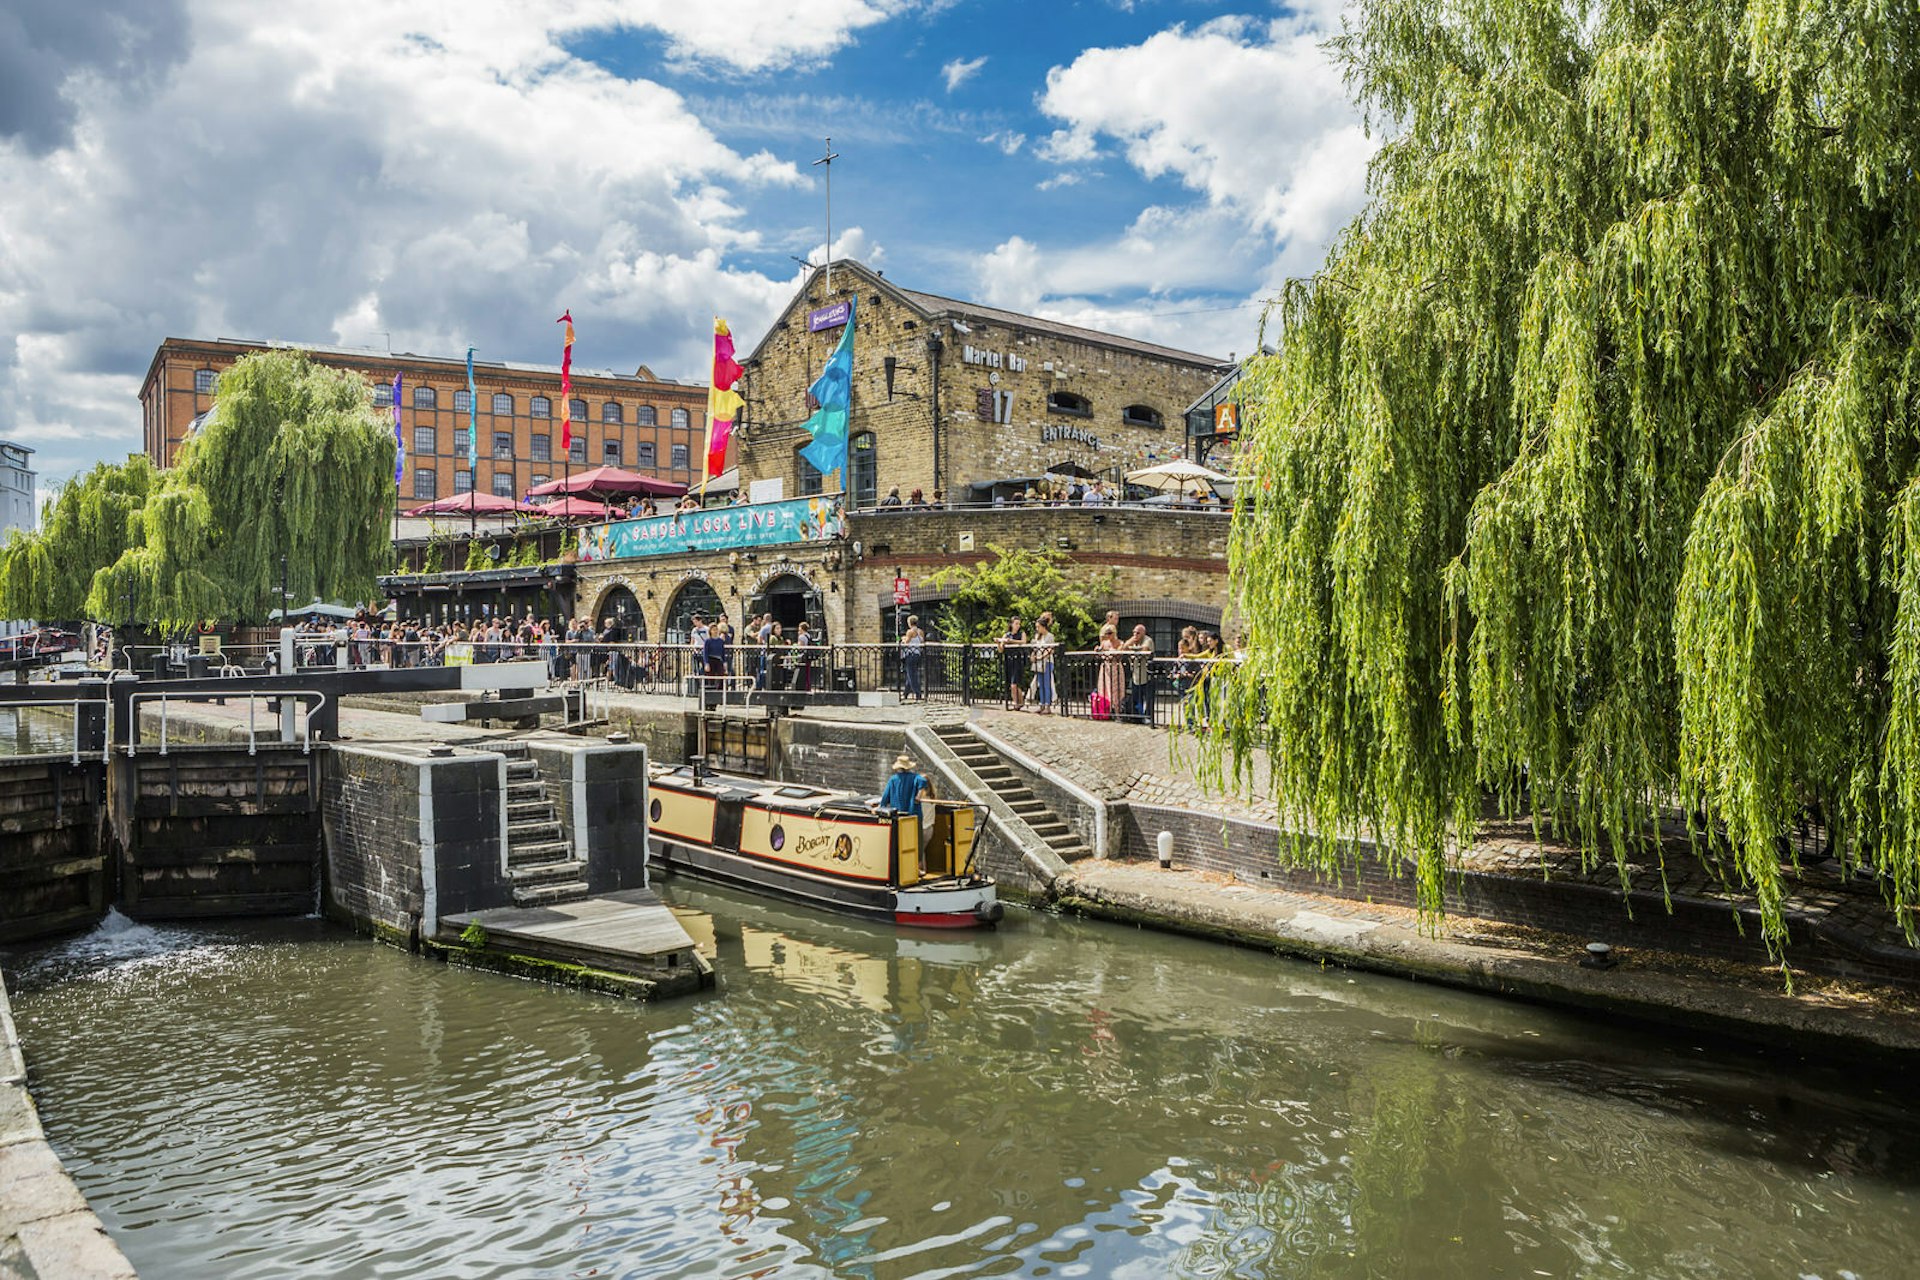 If the crowds at the market get too much, spend some time along the canal in Camden © Massimo Borchi / Atlantide Phototravel / Getty Images